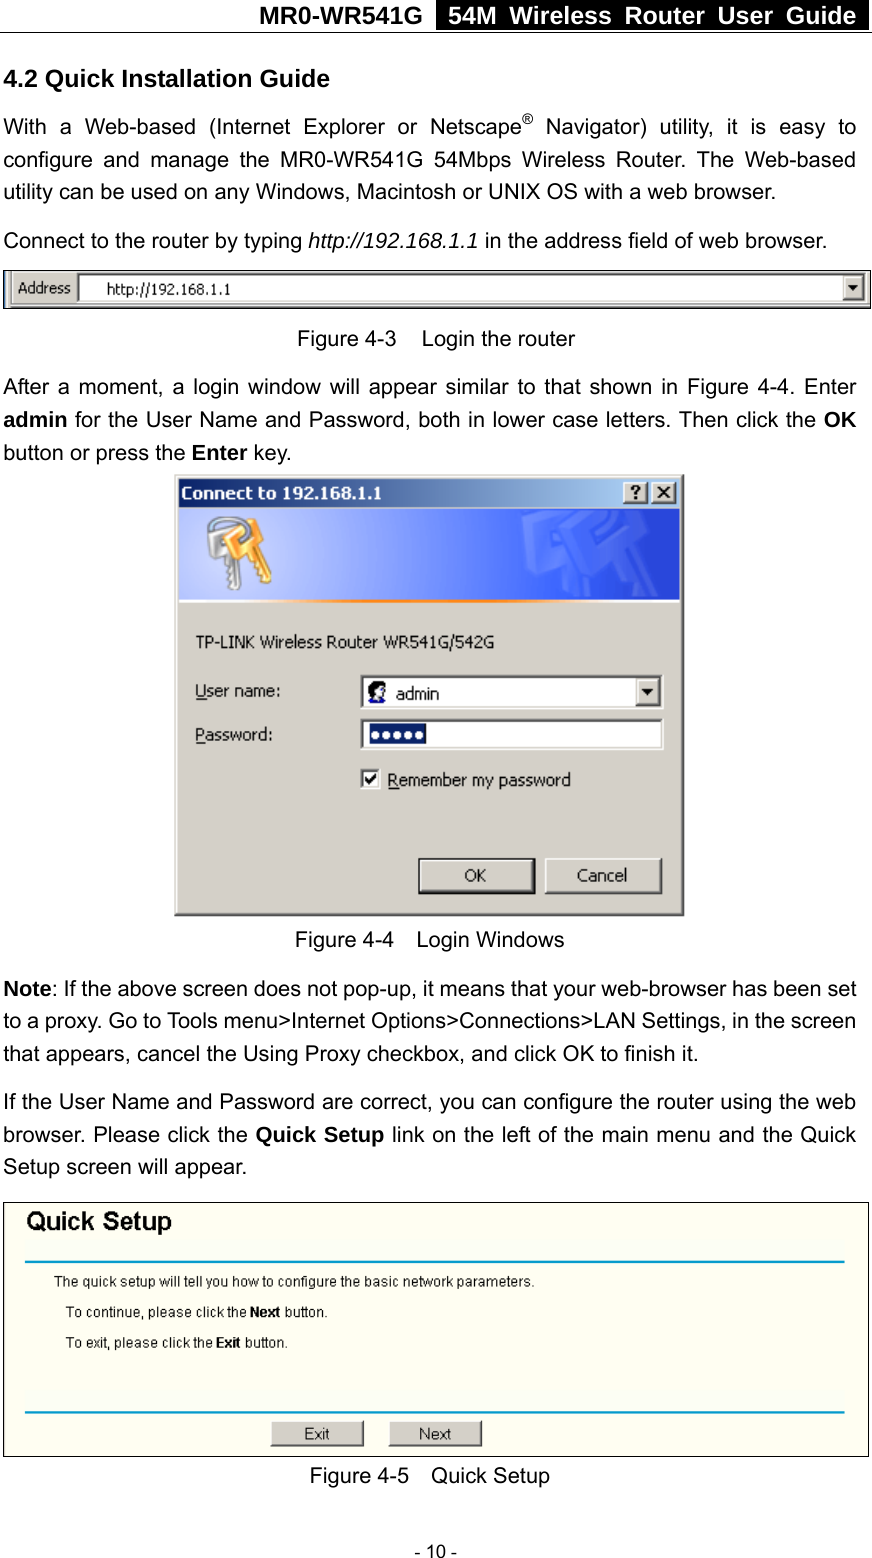 MR0-WR541G   54M Wireless Router User Guide  4.2 Quick Installation Guide With a Web-based (Internet Explorer or Netscape® Navigator) utility, it is easy to configure and manage the MR0-WR541G 54Mbps Wireless Router. The Web-based utility can be used on any Windows, Macintosh or UNIX OS with a web browser. Connect to the router by typing http://192.168.1.1 in the address field of web browser.  Figure 4-3  Login the router After a moment, a login window will appear similar to that shown in Figure 4-4. Enter admin for the User Name and Password, both in lower case letters. Then click the OK button or press the Enter key.  Figure 4-4  Login Windows Note: If the above screen does not pop-up, it means that your web-browser has been set to a proxy. Go to Tools menu&gt;Internet Options&gt;Connections&gt;LAN Settings, in the screen that appears, cancel the Using Proxy checkbox, and click OK to finish it. If the User Name and Password are correct, you can configure the router using the web browser. Please click the Quick Setup link on the left of the main menu and the Quick Setup screen will appear.  Figure 4-5  Quick Setup  - 10 - 